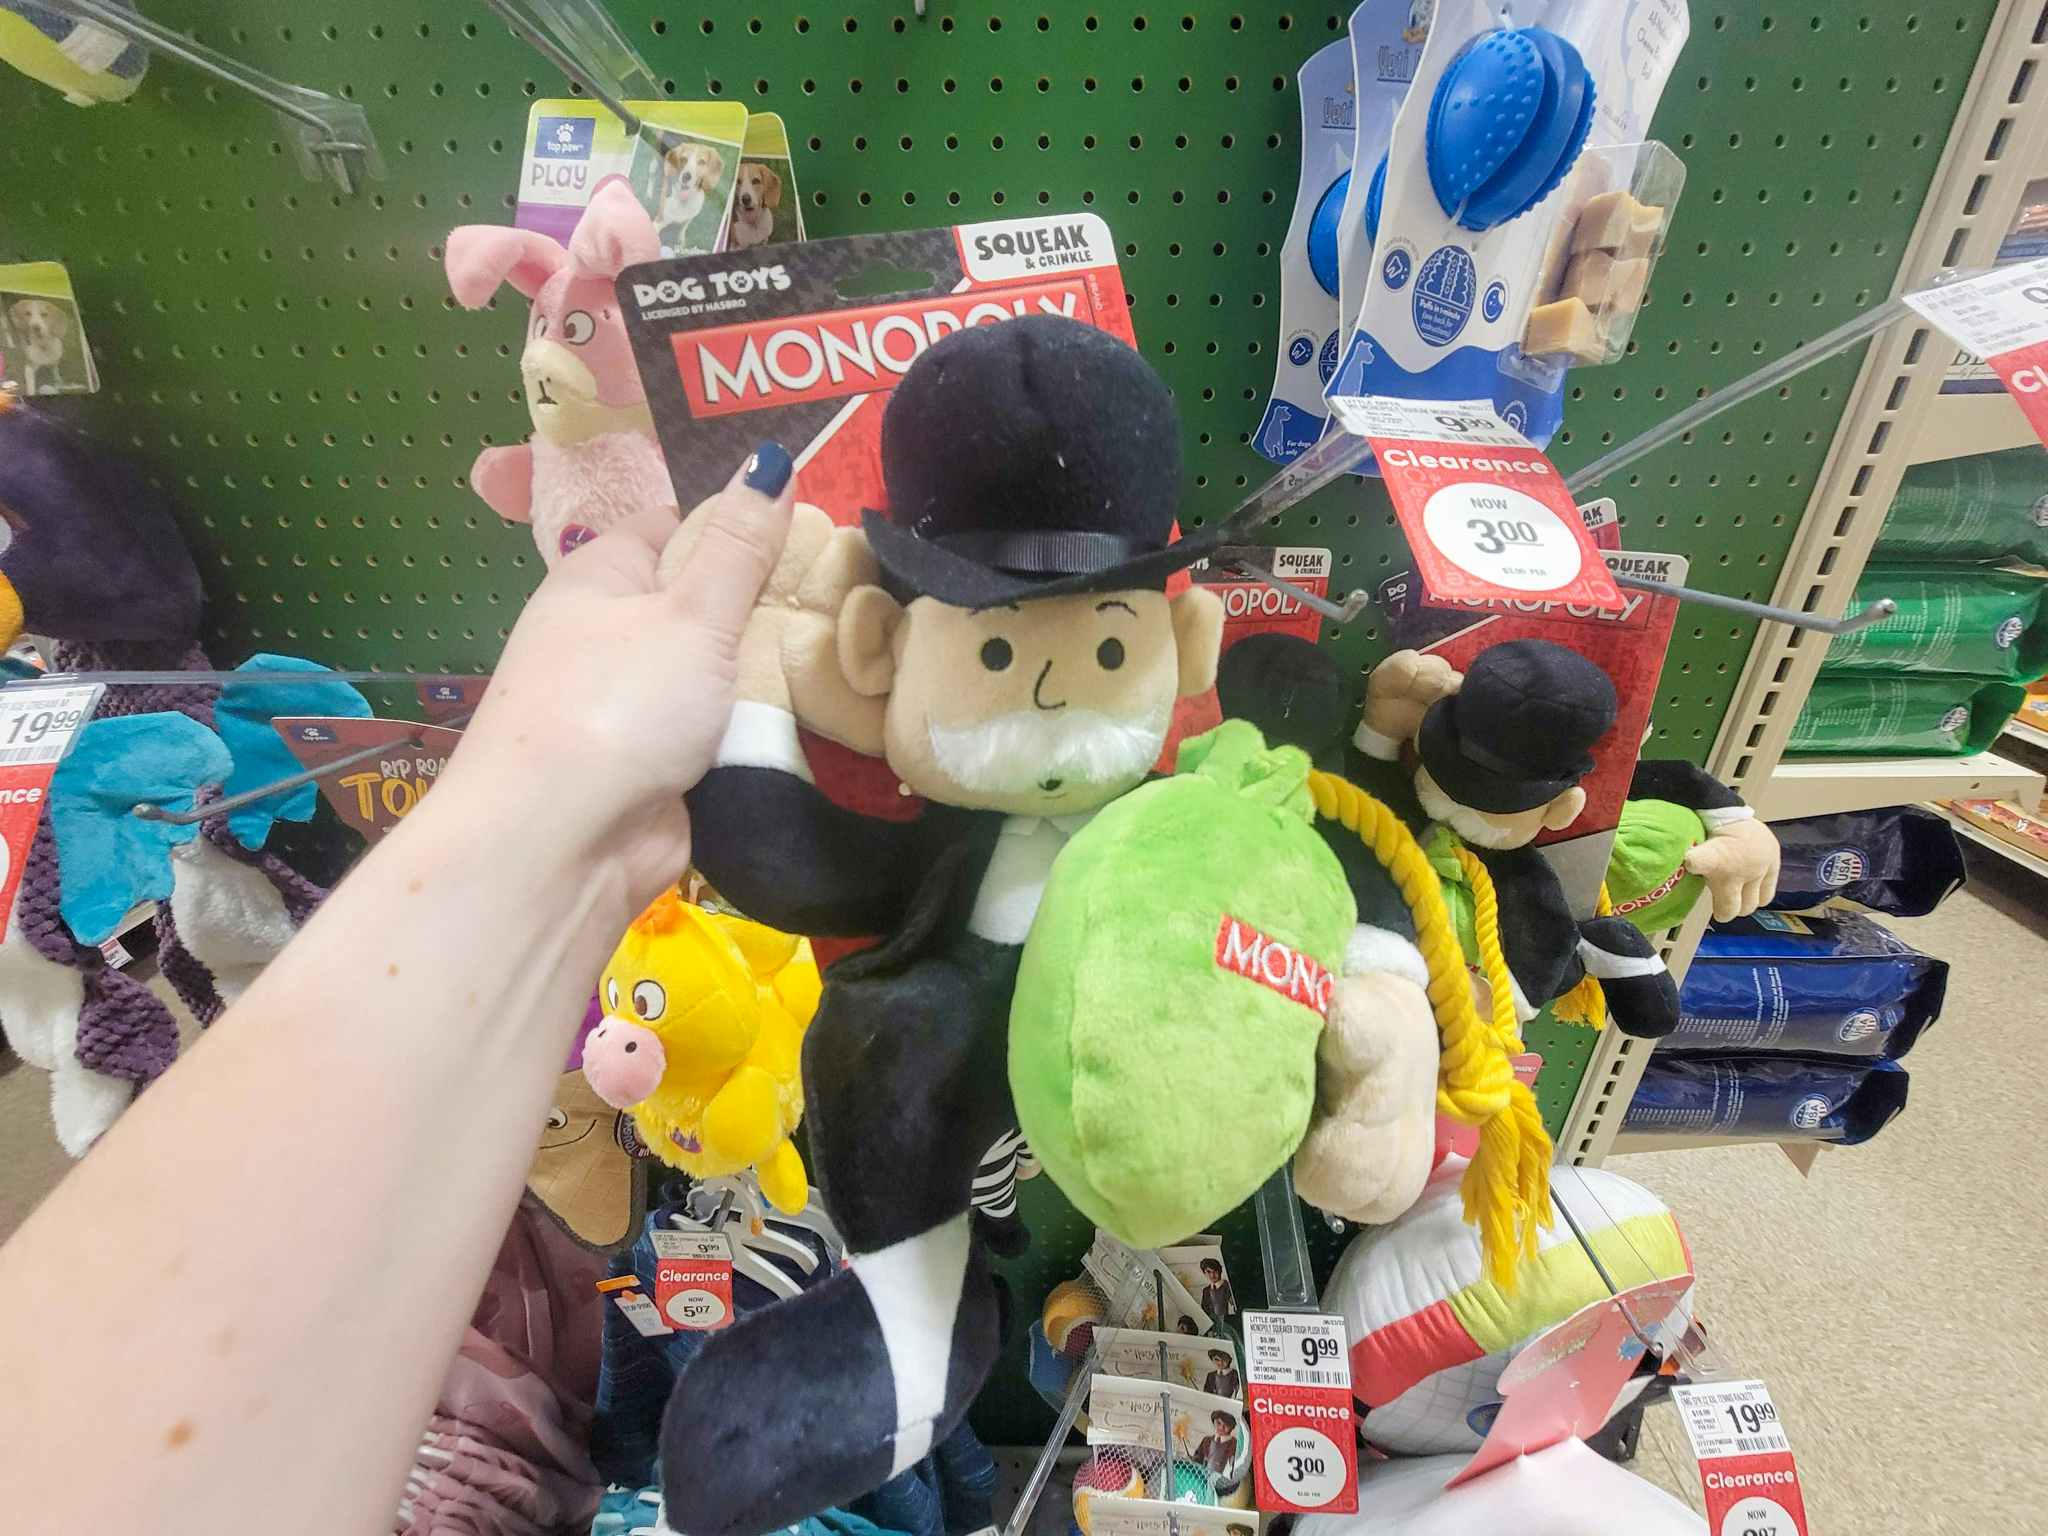 hand holding a monopoly man dog toy holding a bag of money